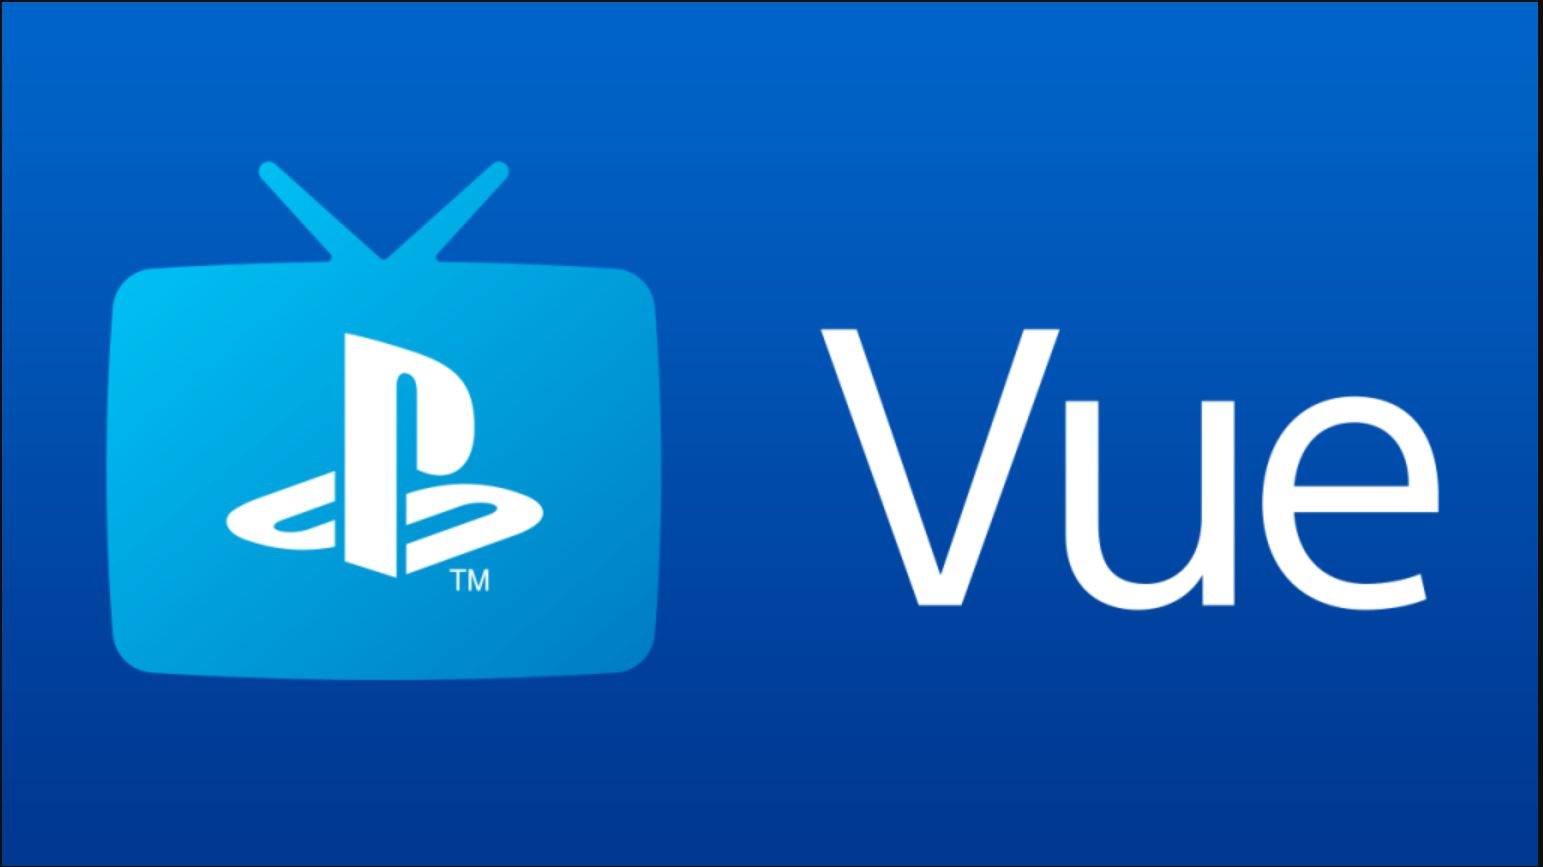 watch recorded shows on PlayStation Vue